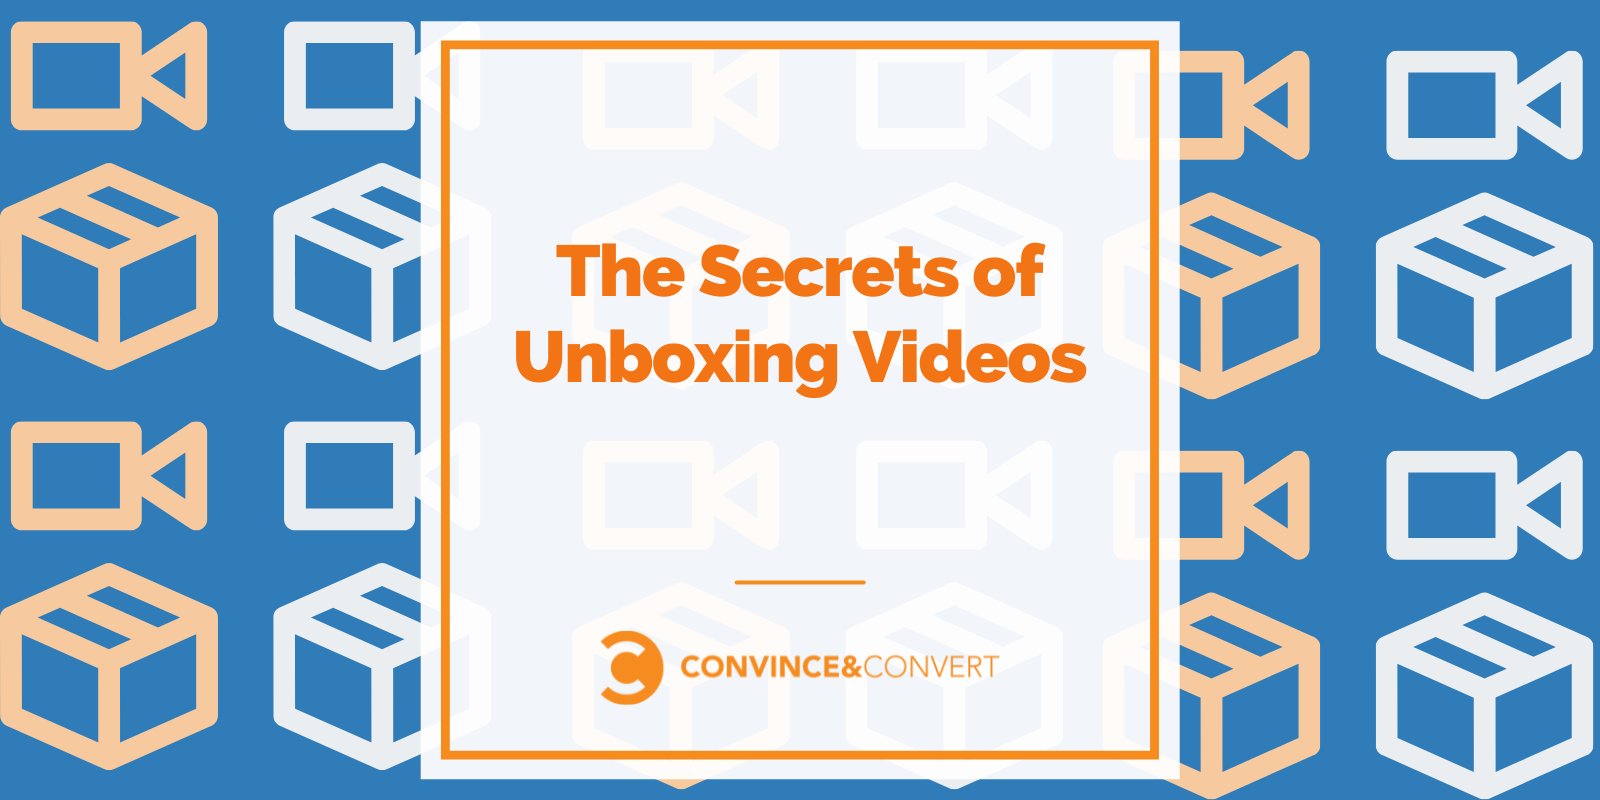 The Secrets of Unboxing Videos